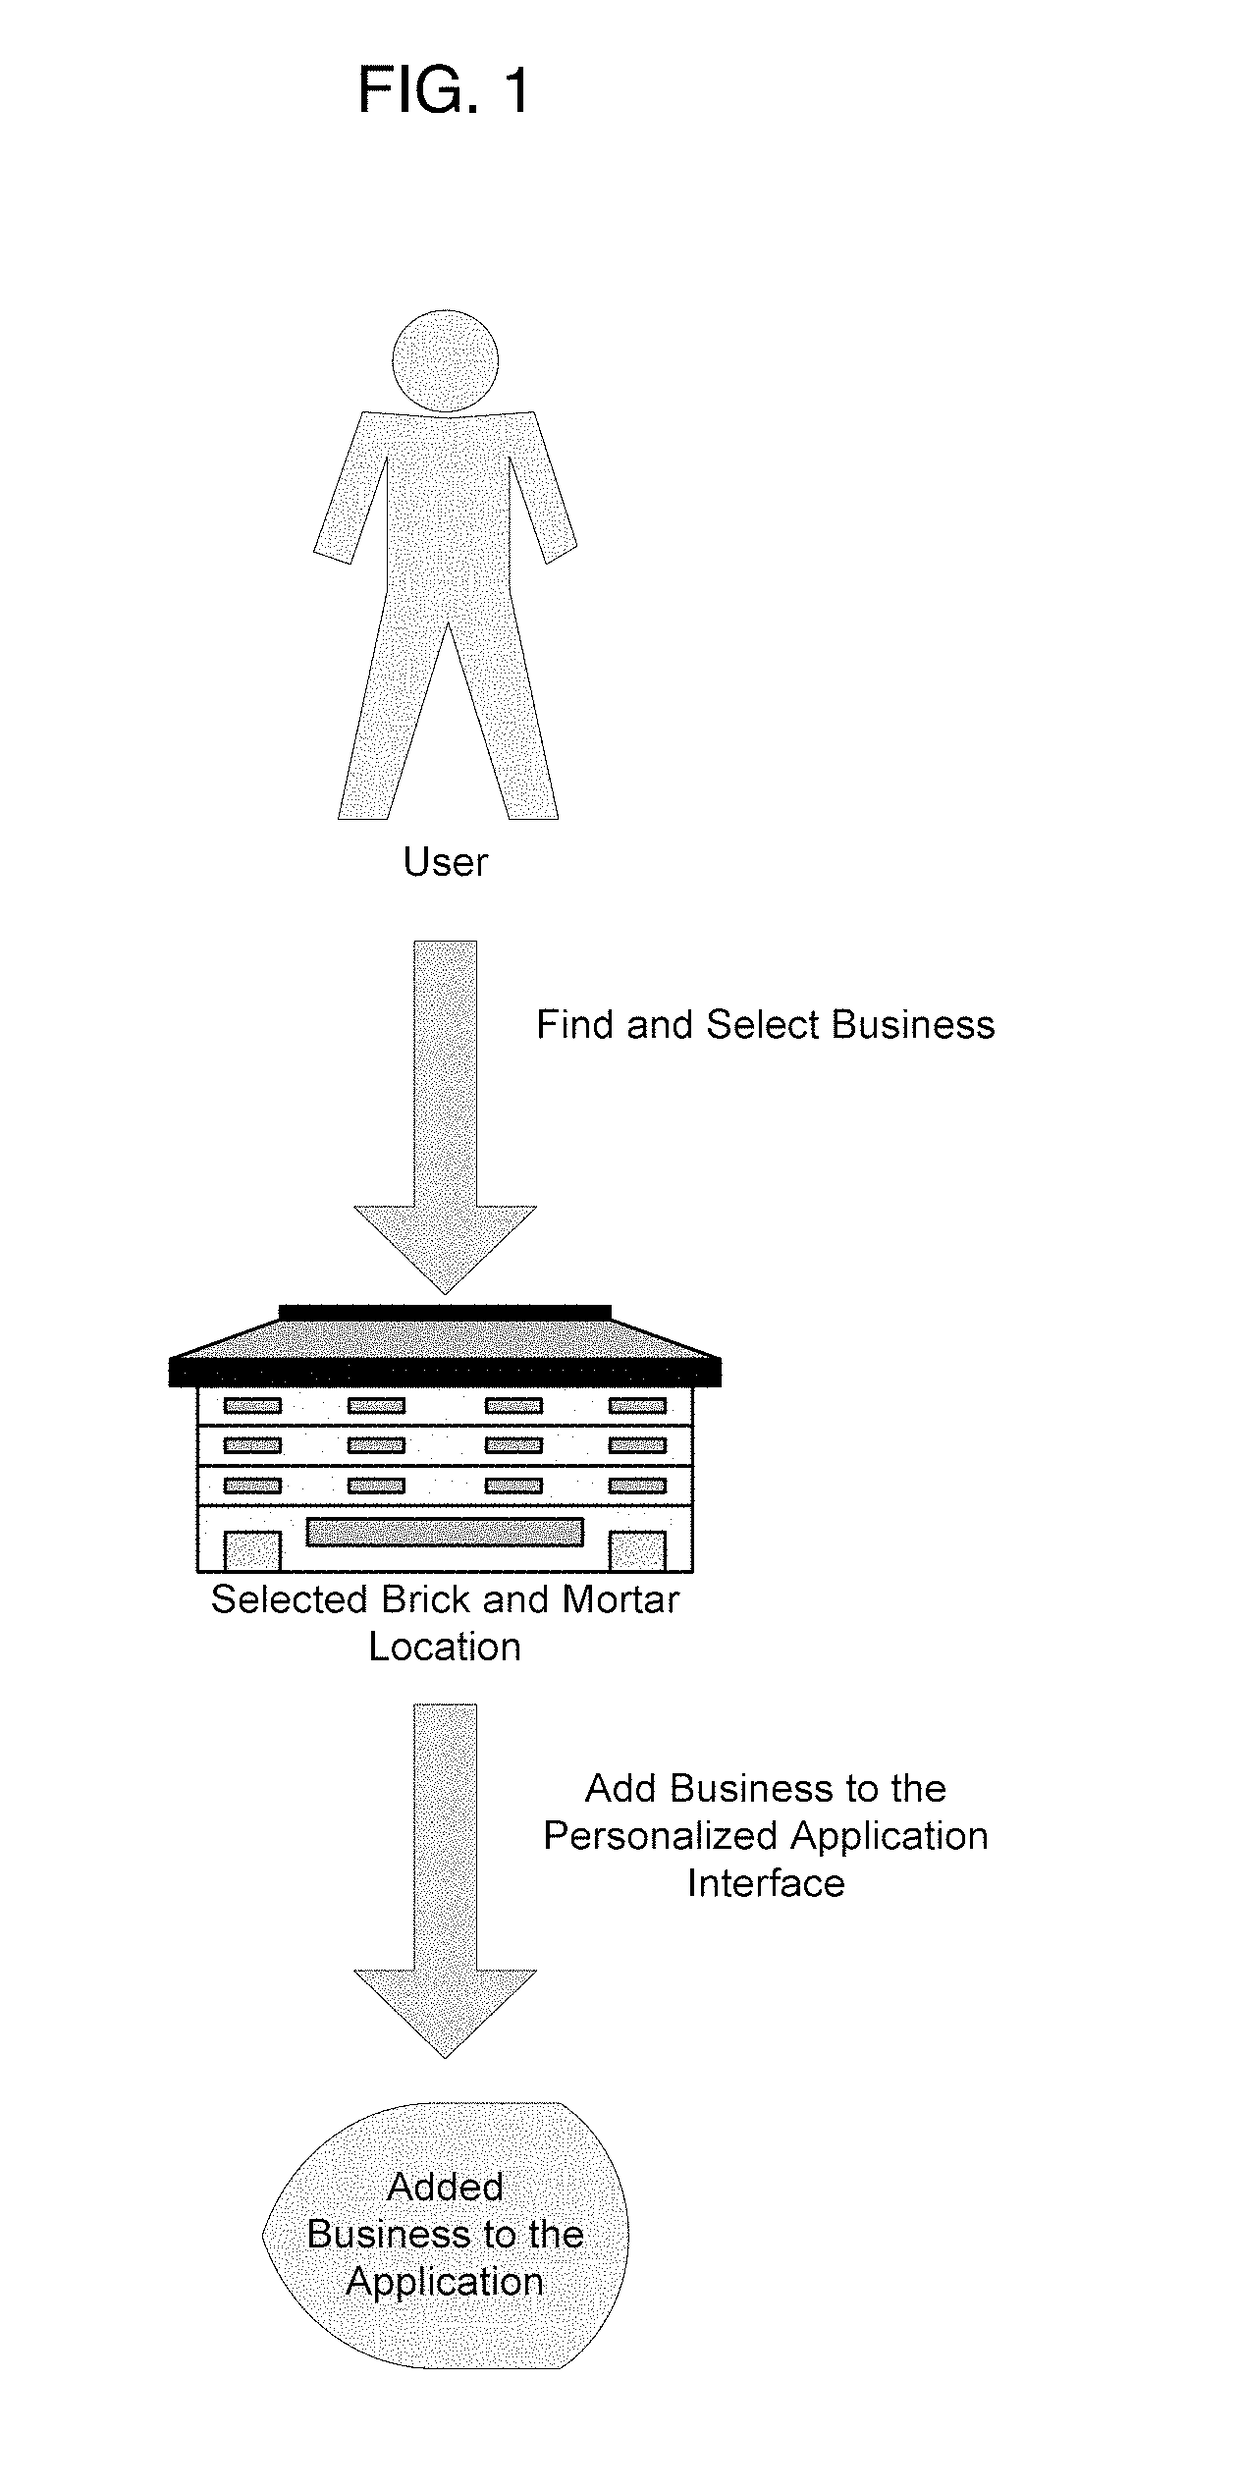 Systems and methods for high-relevancy online advertising via consumer-initiated computer communications between a business and a consumer